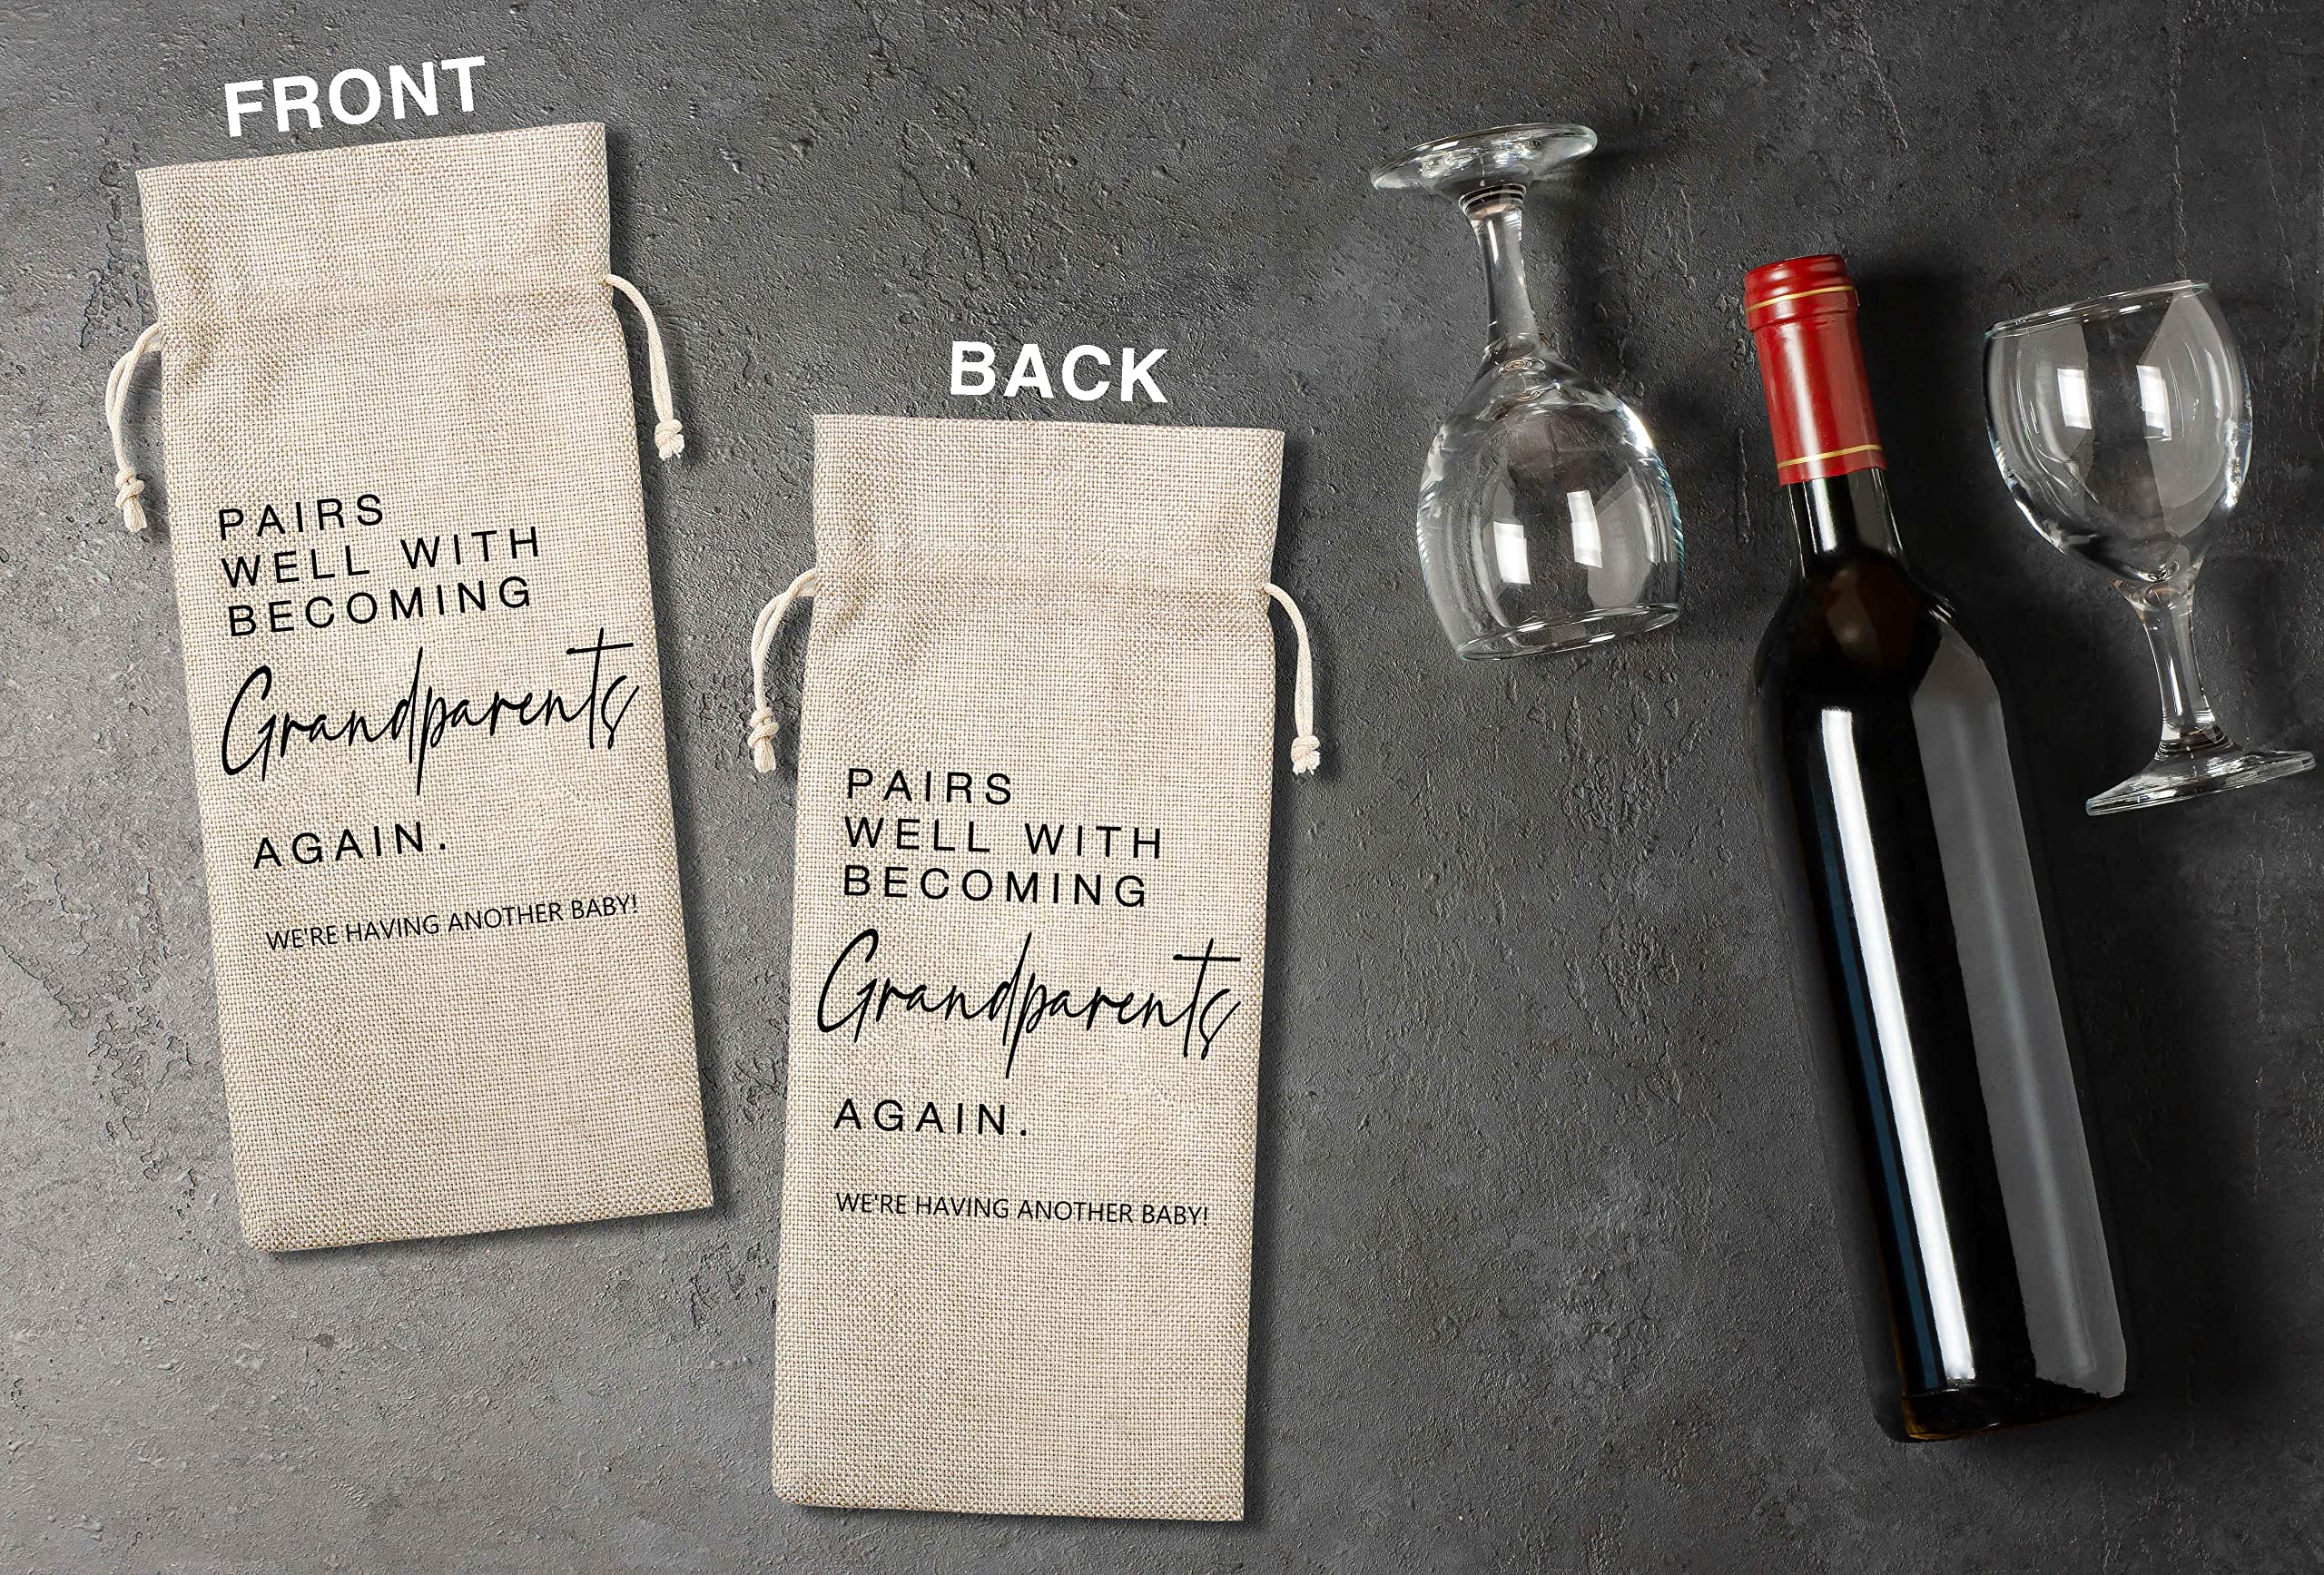 Baby Announcement Wine Bag, Pairs Well With Becoming Grandparent Again: We Are Having Another Baby, Pregnancy Announcement, New Grandparents - 1 Pack (WINEDAI-035)